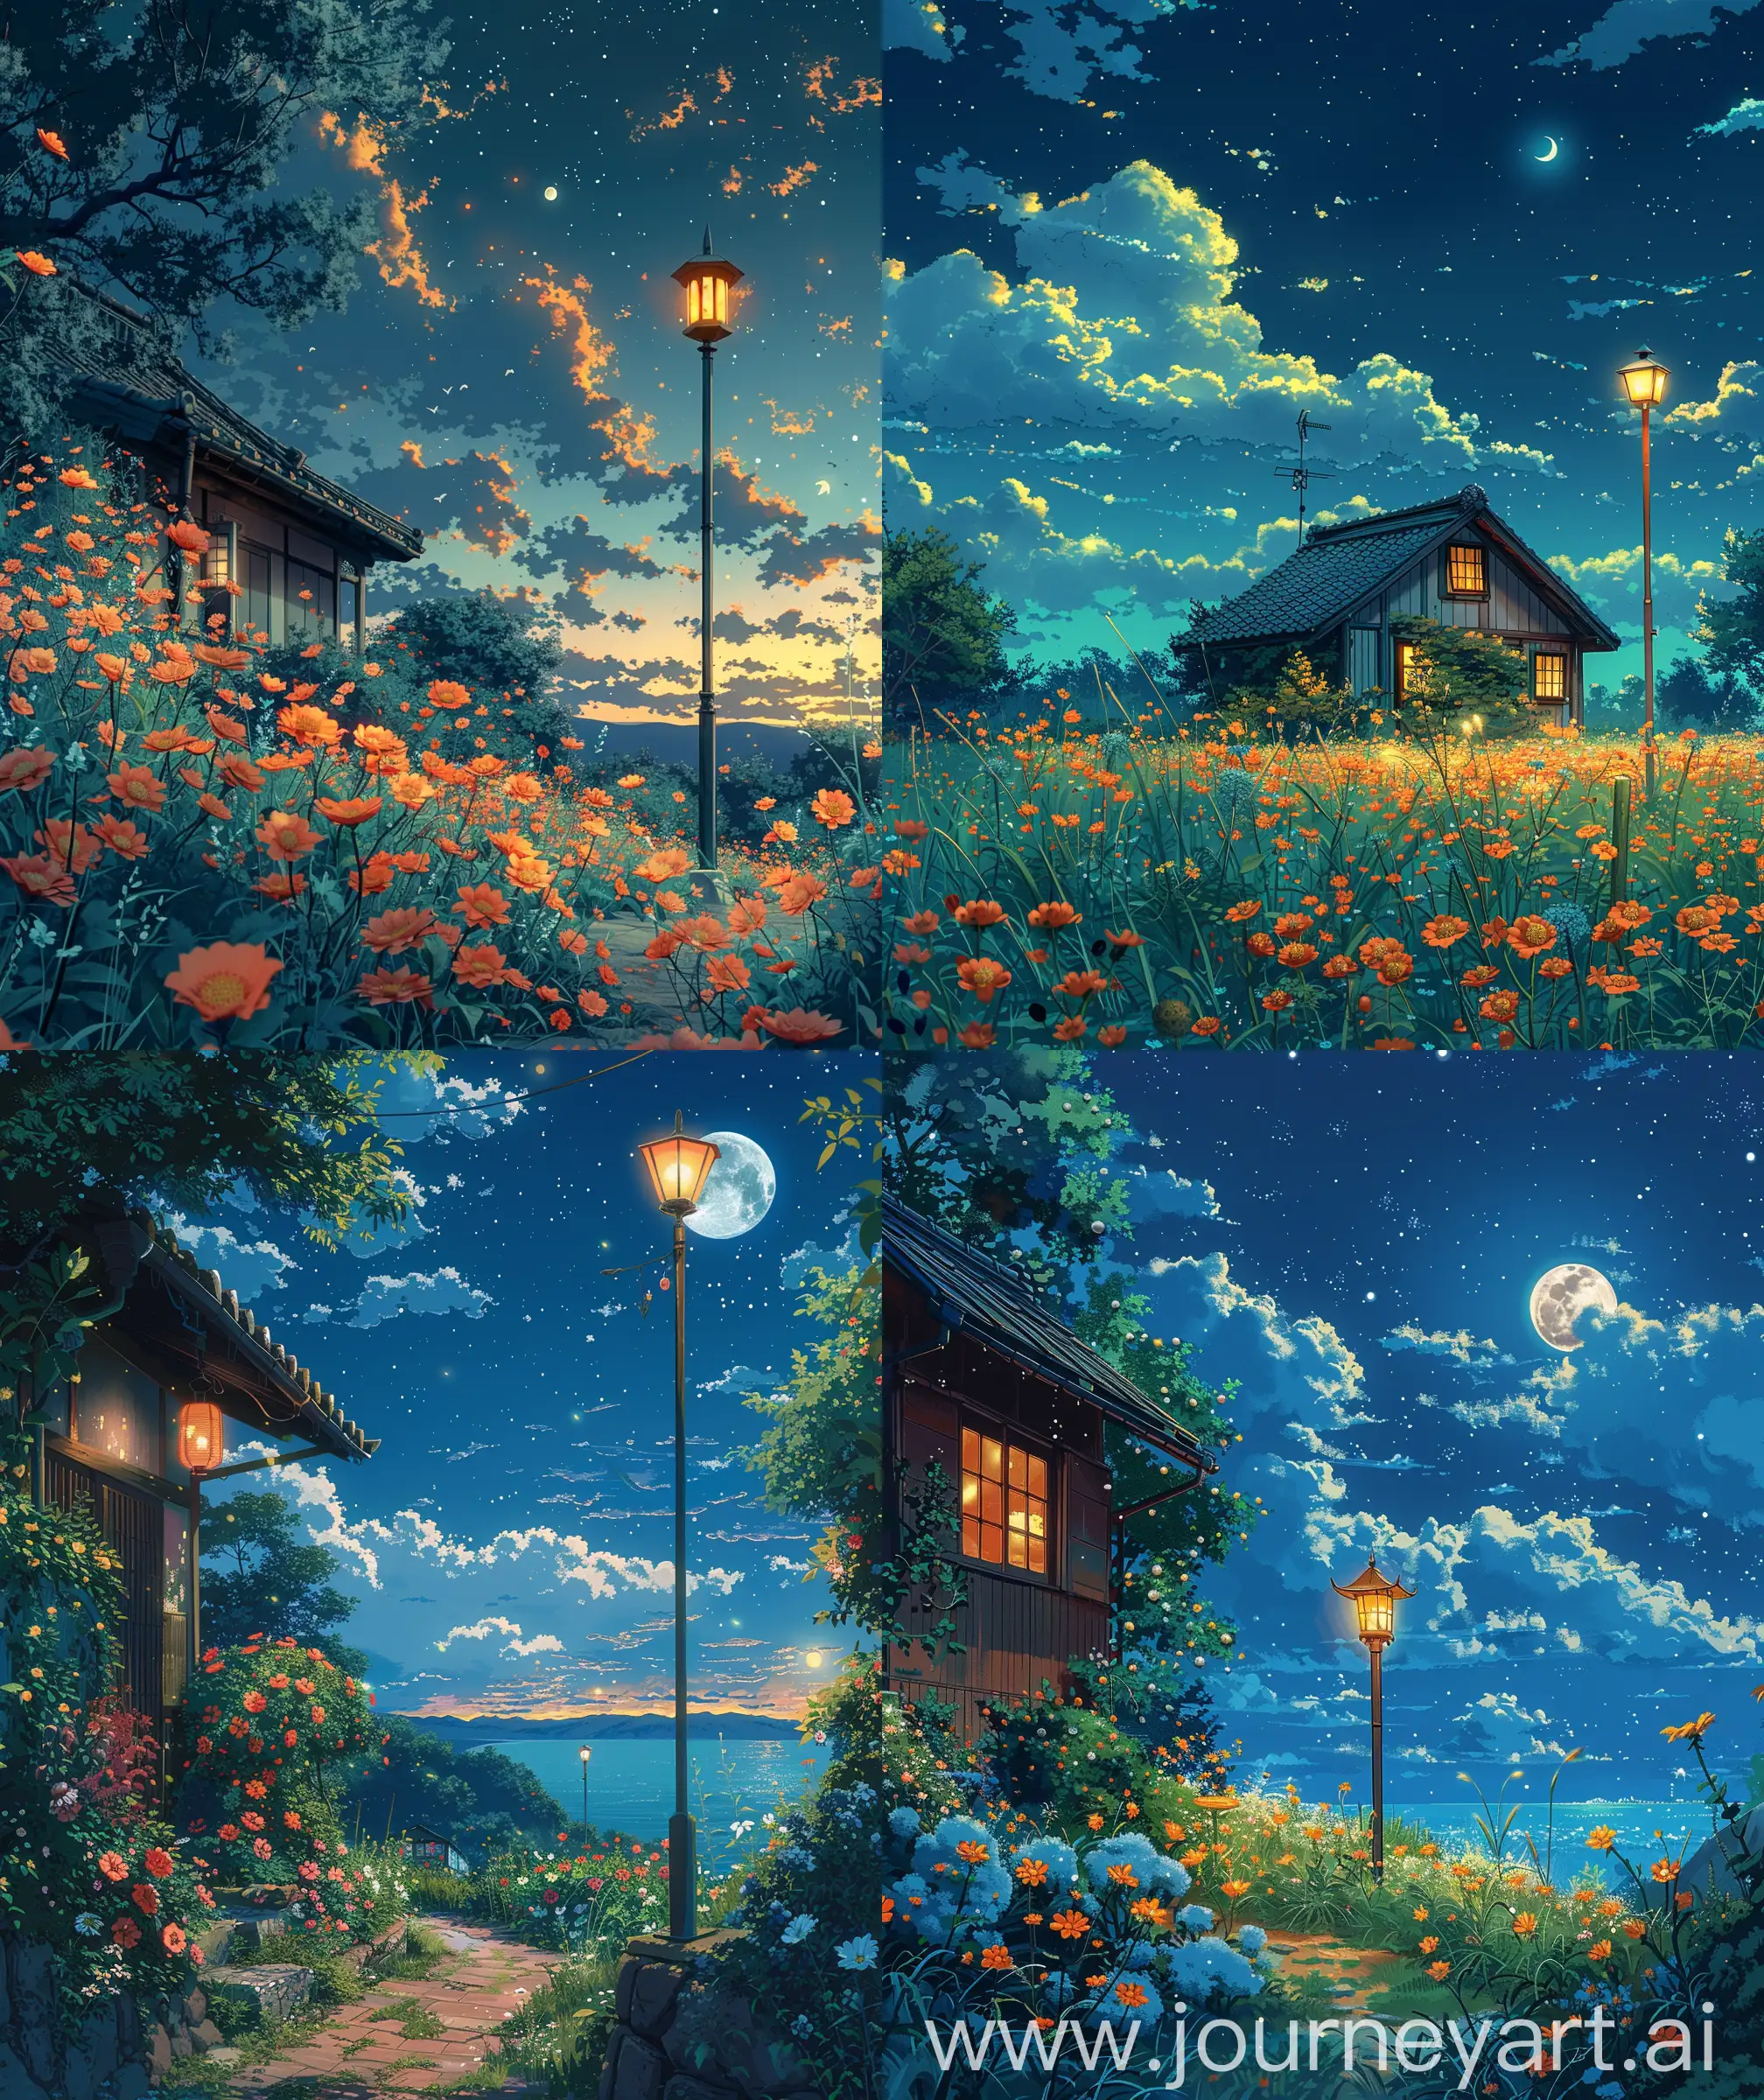 Anime scenary, mokoto shinkai and Ghibli style mix, direct front facade view of Relaxing in wild , vibrant look, flowers, lamp post, cozy vibe, clear sky, moonlight sky, moon, breeze, illustration, ultra hd, High quality, sharp details, no hyperrealistic --ar 27:32 --s 400 